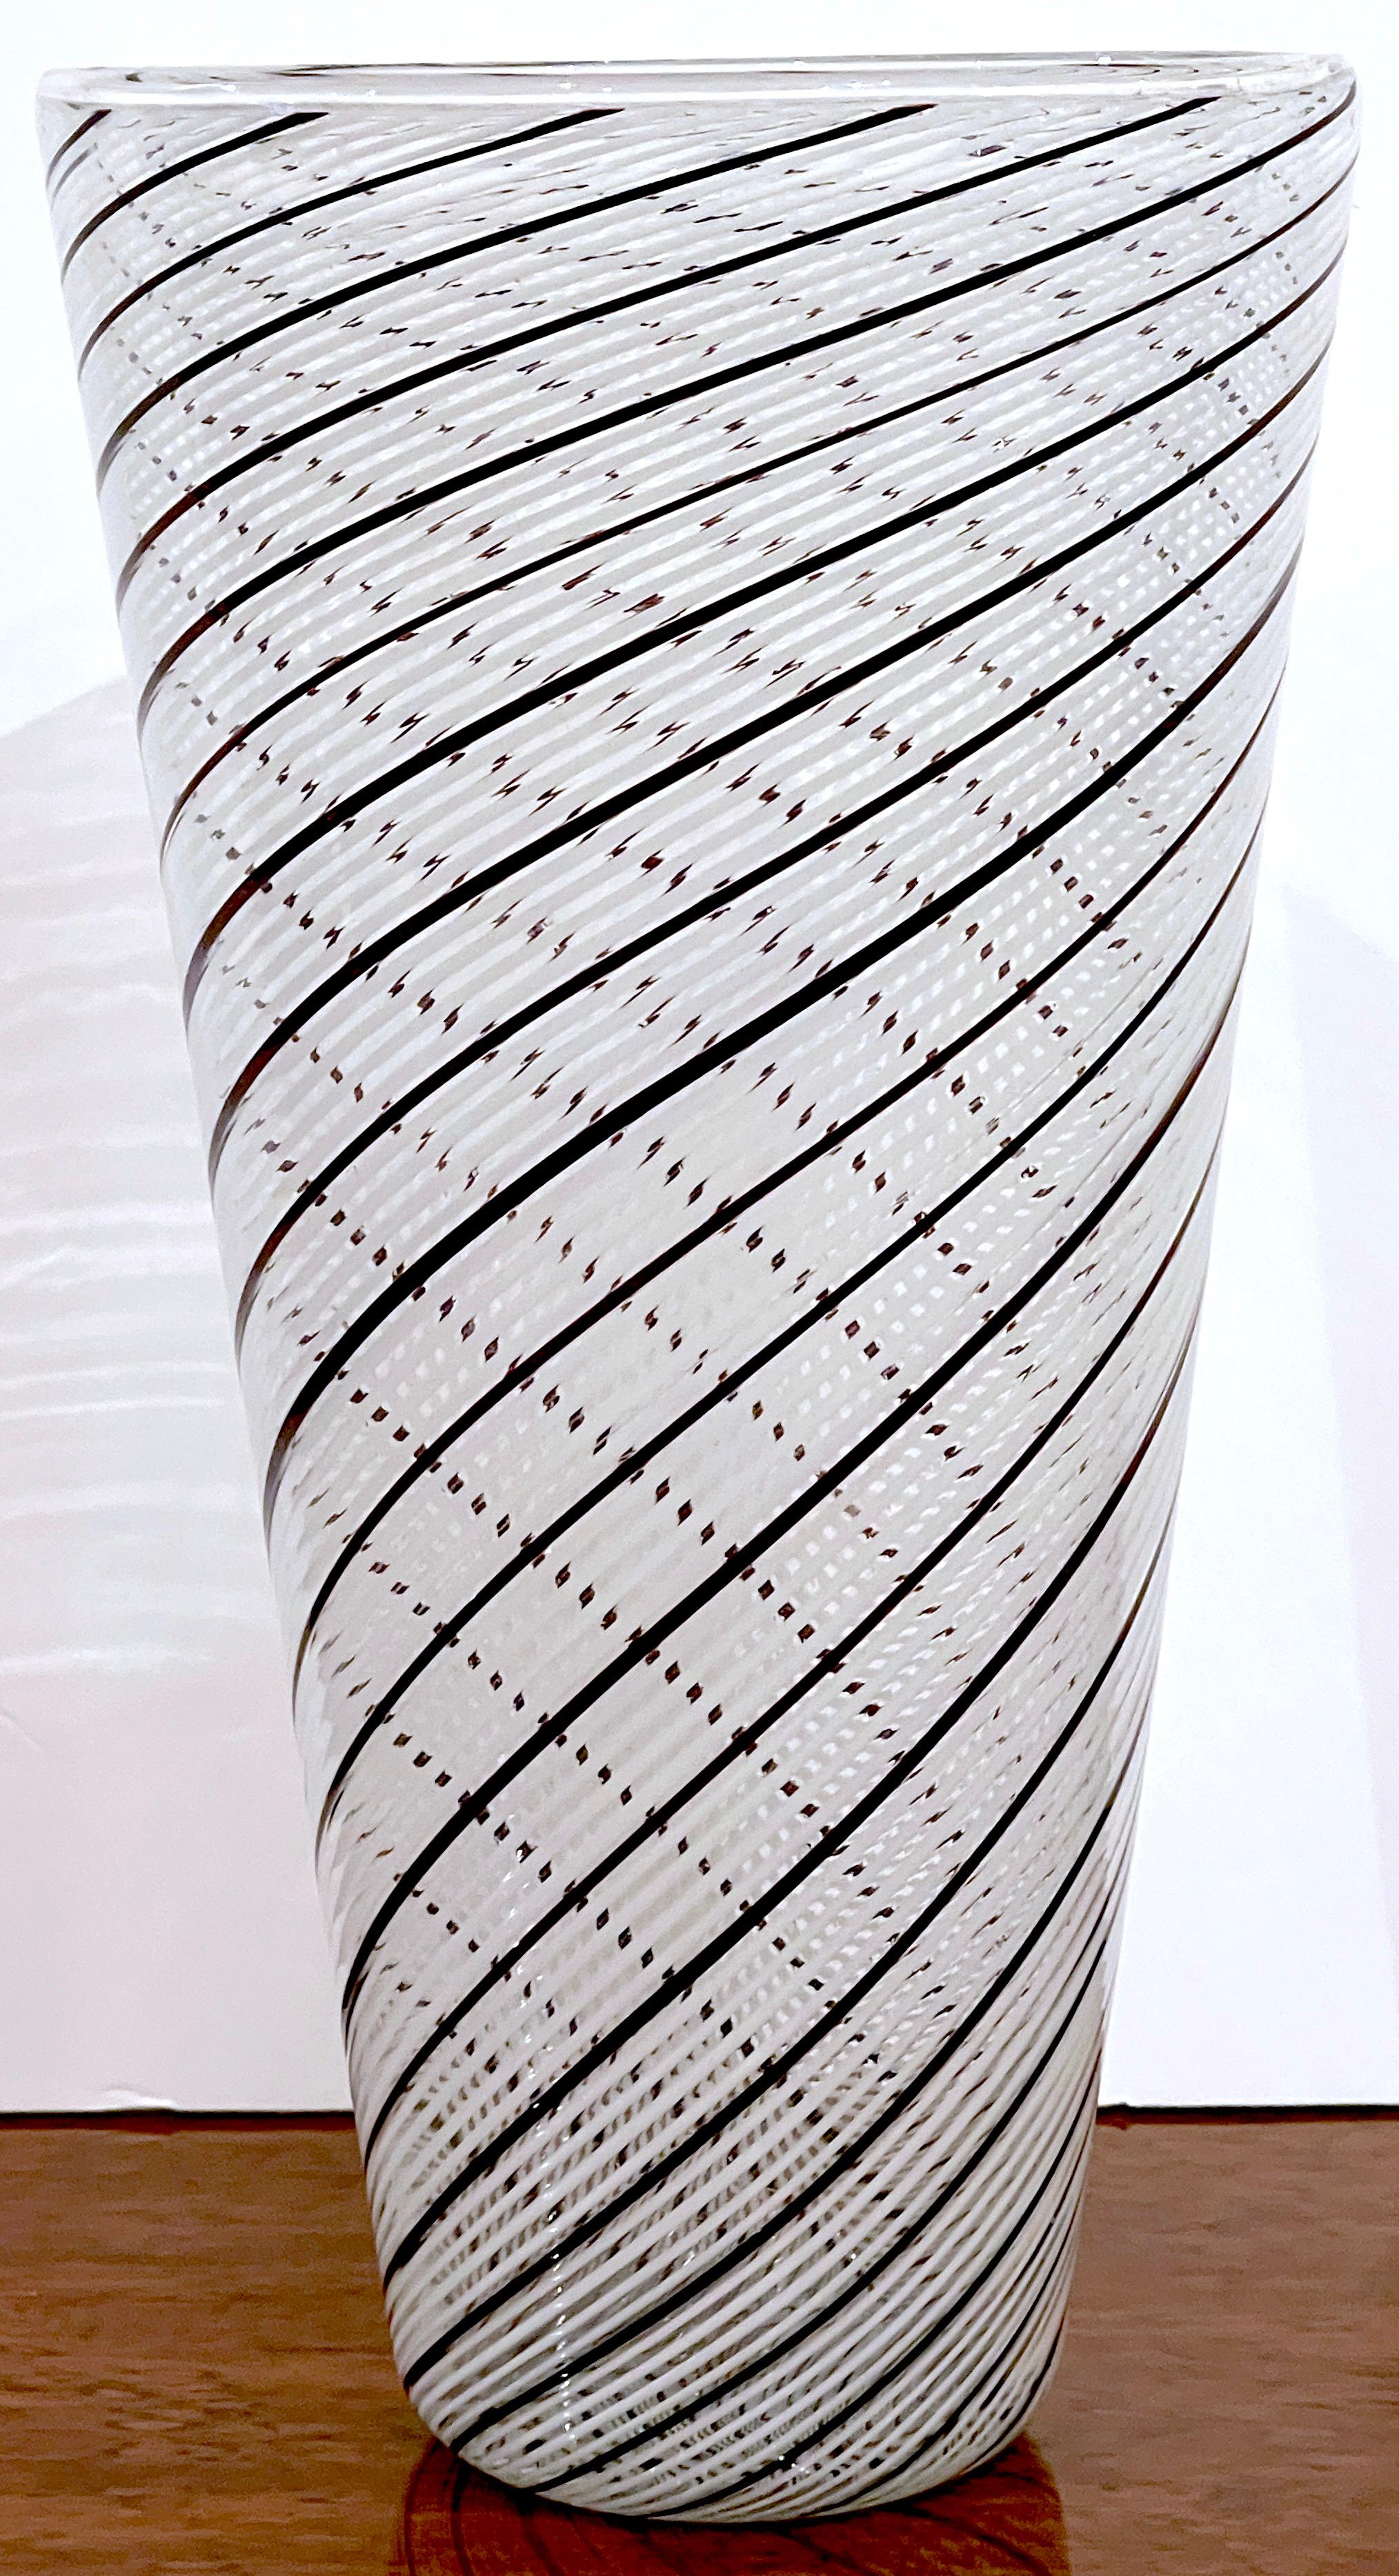 Dino Martens ( Atrib.) Black & White Mezza Filigrana Murano Cylindrical Vase 
Italy, circa 1950s
Dino Martens (1894–1970) was an Italian painter and designer particularly noted for his glass work trained at the Accademia di Belle Arti , Most often